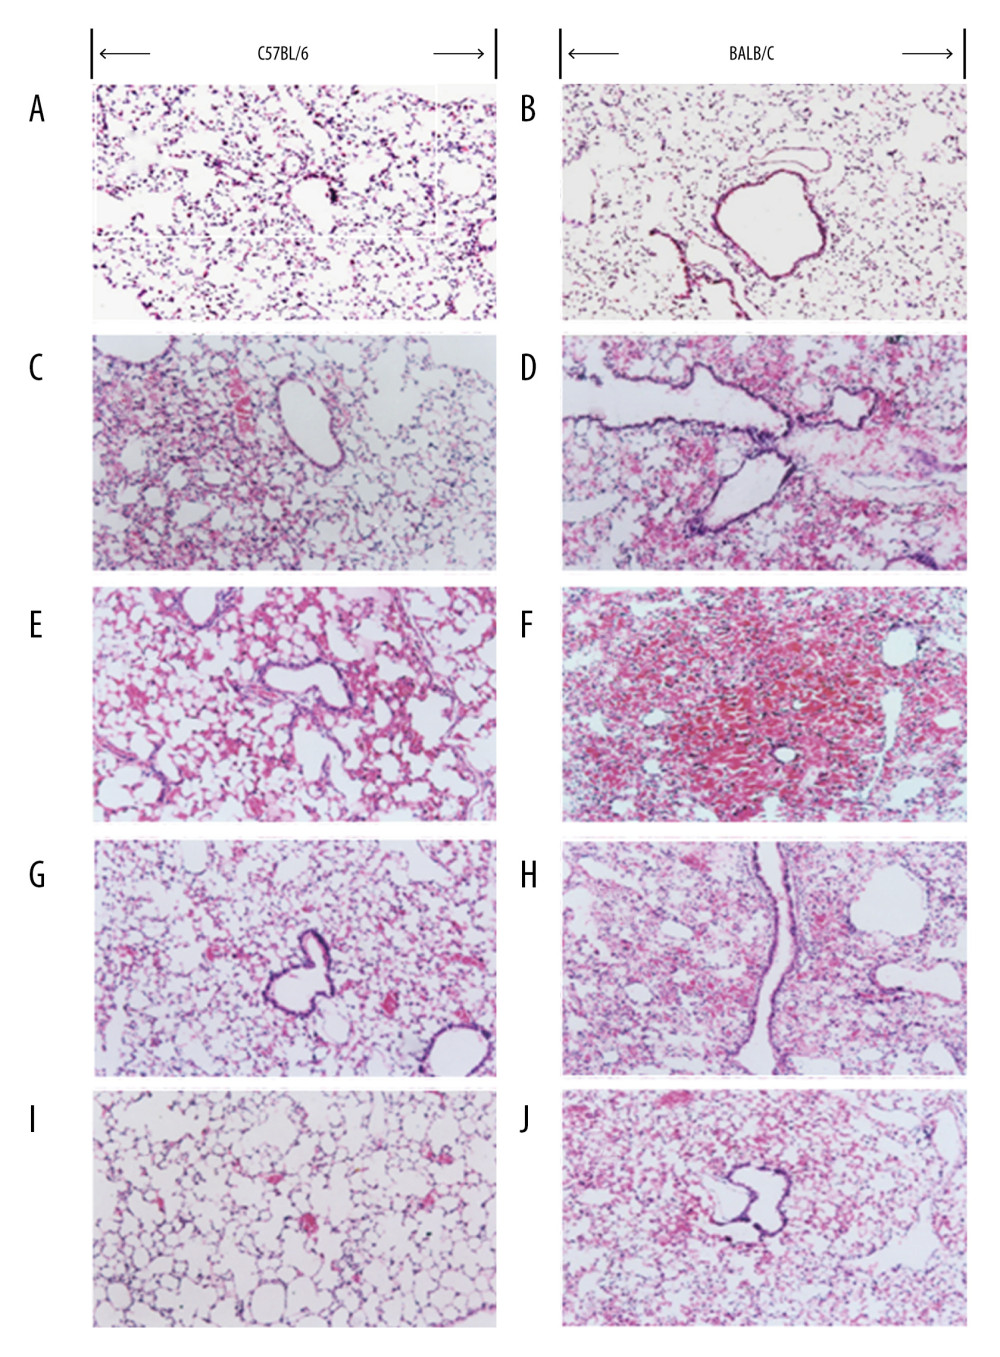 Histopathological changes in C57BL/6 and BALB/C mice before and after systemic blast injury (SBI). Left panels: C57BL/6; right panels: BALB/C. (A, B) before SBI; (C, E, G, I) 1, 6, 24, and 72 h post-SBI, respectively; (D, F, H, J) 1, 6, 24, and 72 h post-SBI respectively. All sections stained with hematoxylin and eosin; magnification, ×100.